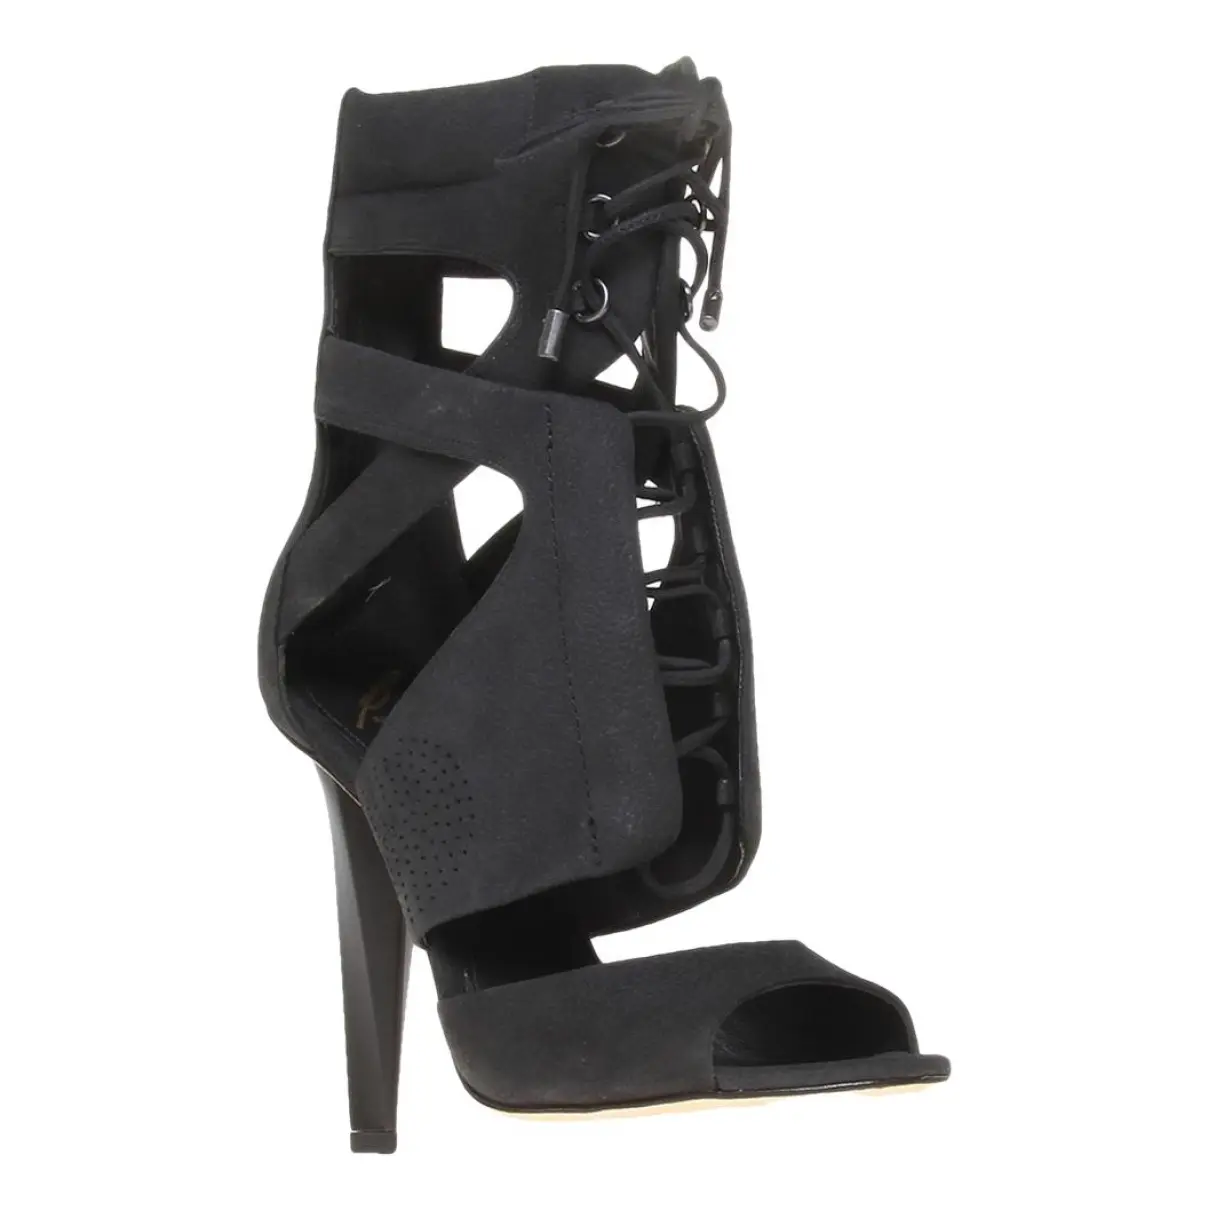 Leather sandal Brian Atwood